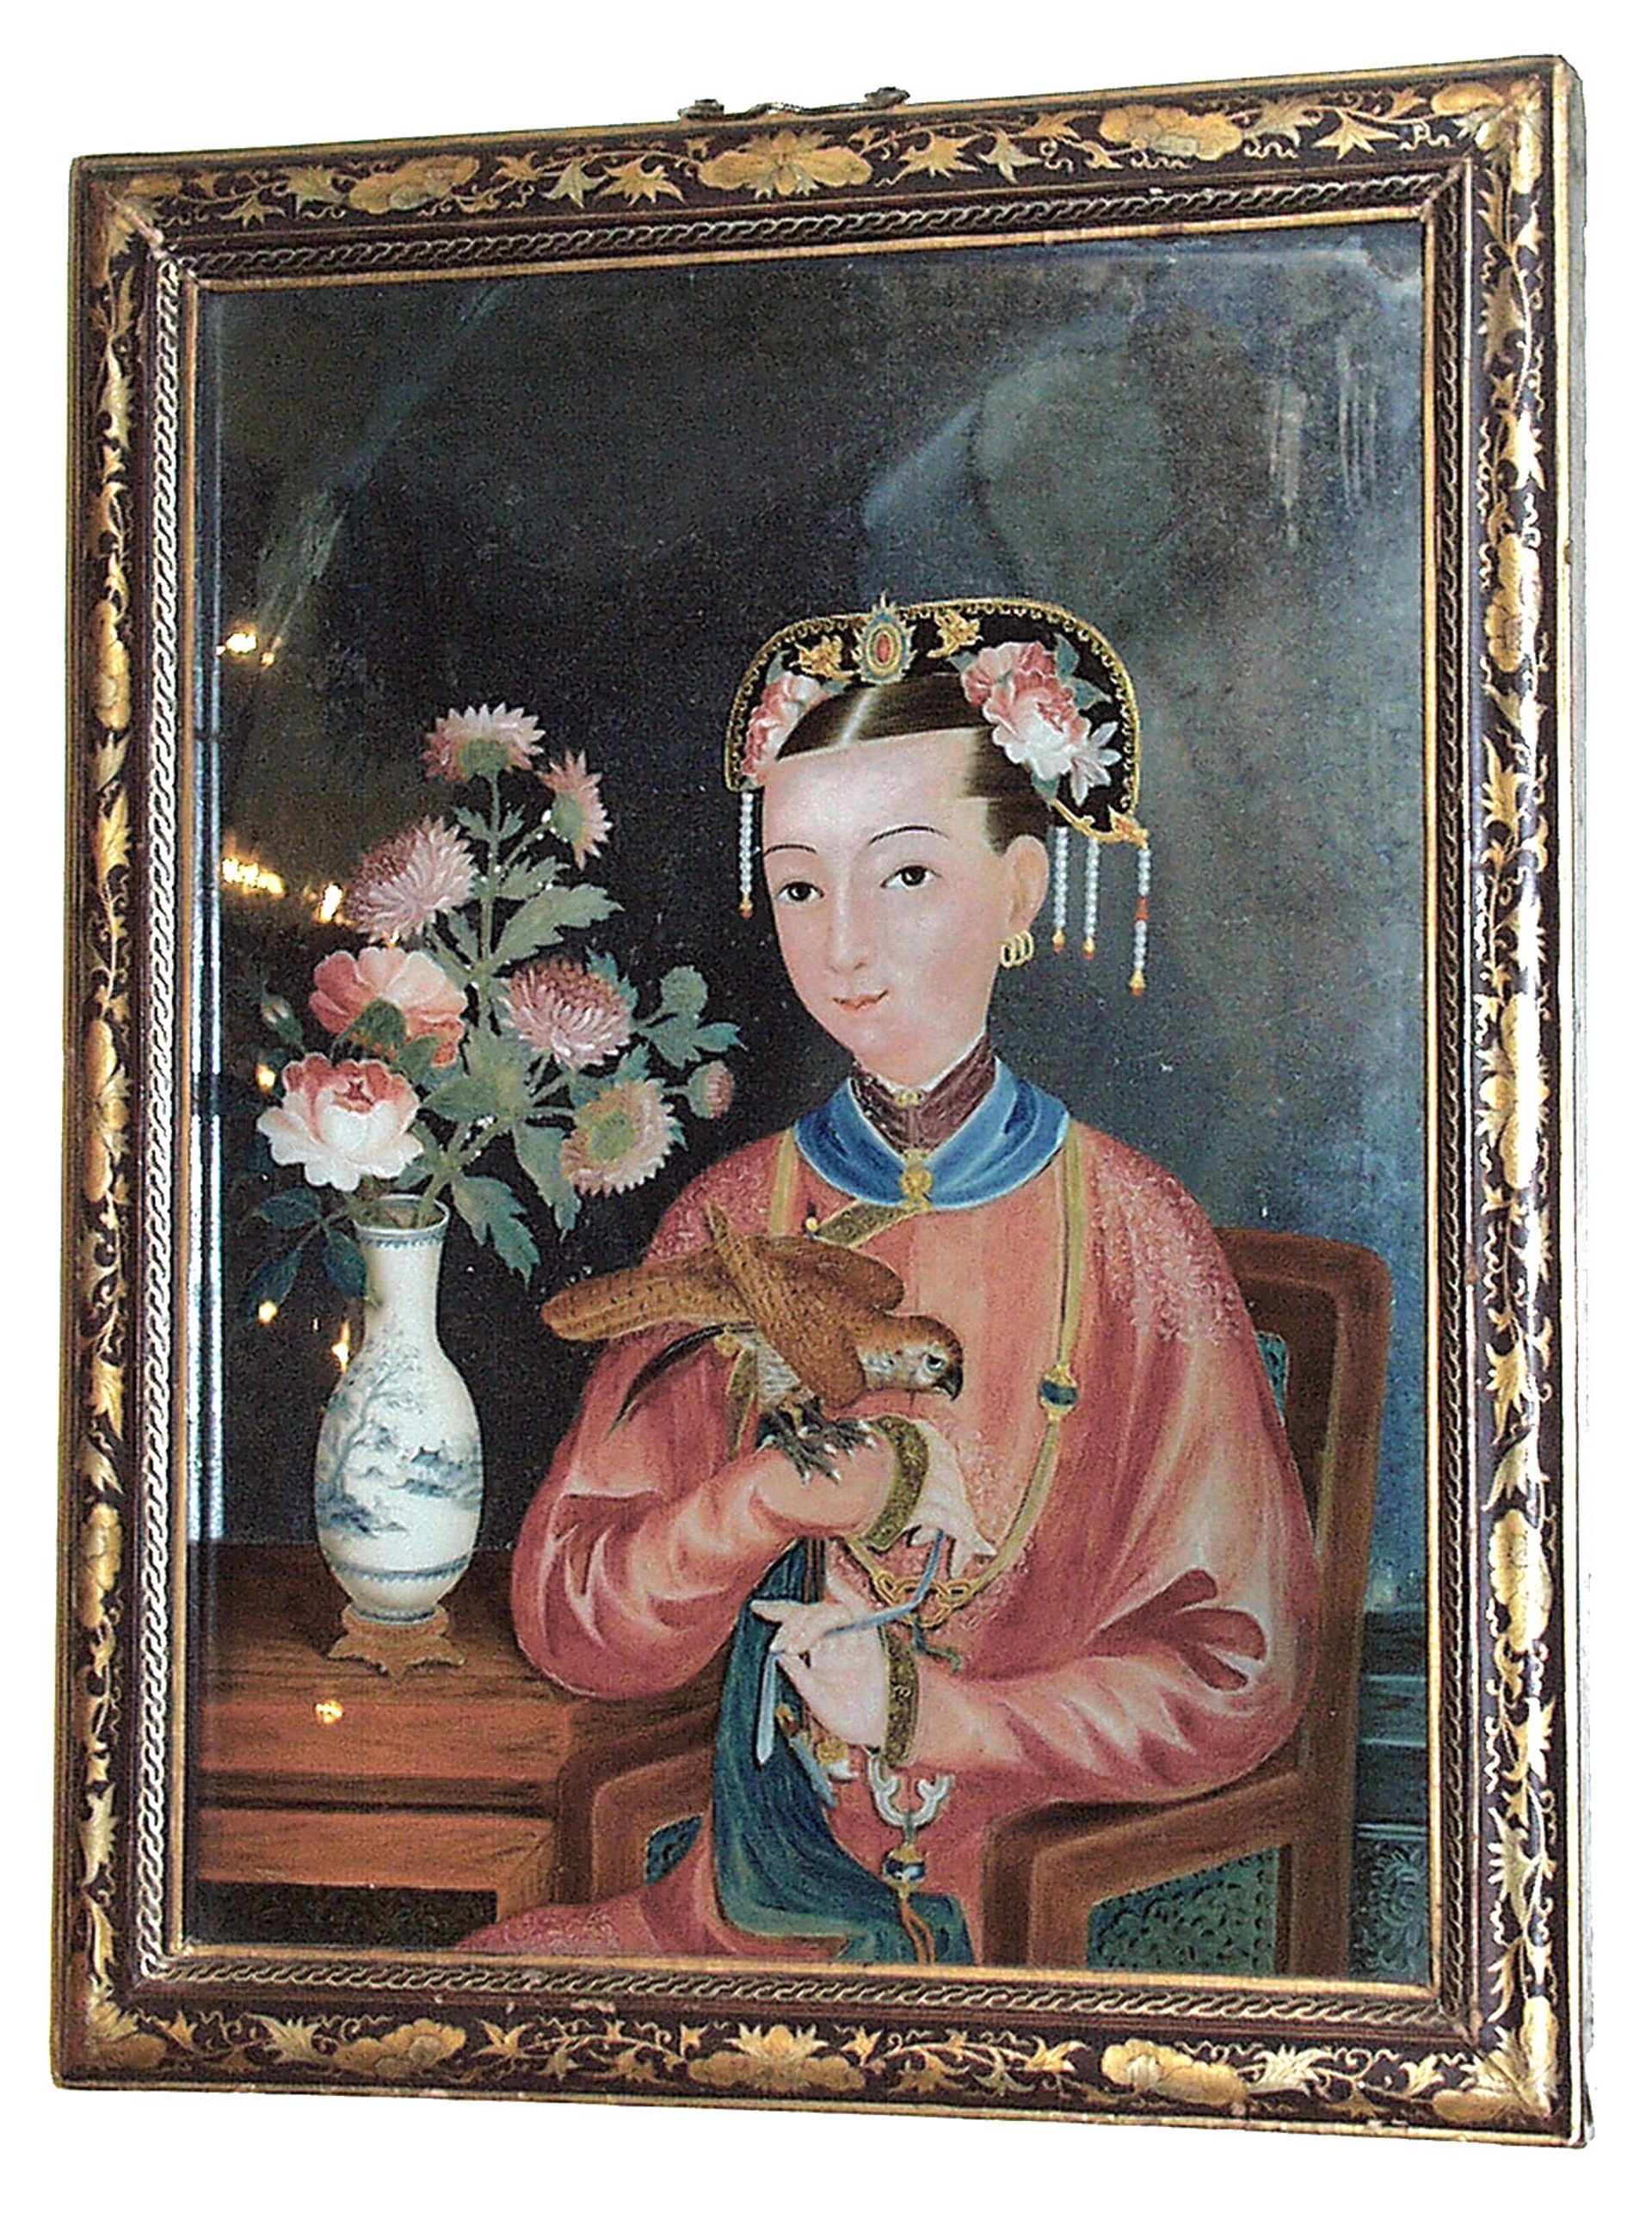 CHINESE REVERSE PAINTING ON GLASS OF A SEATED LADY AND HAWK